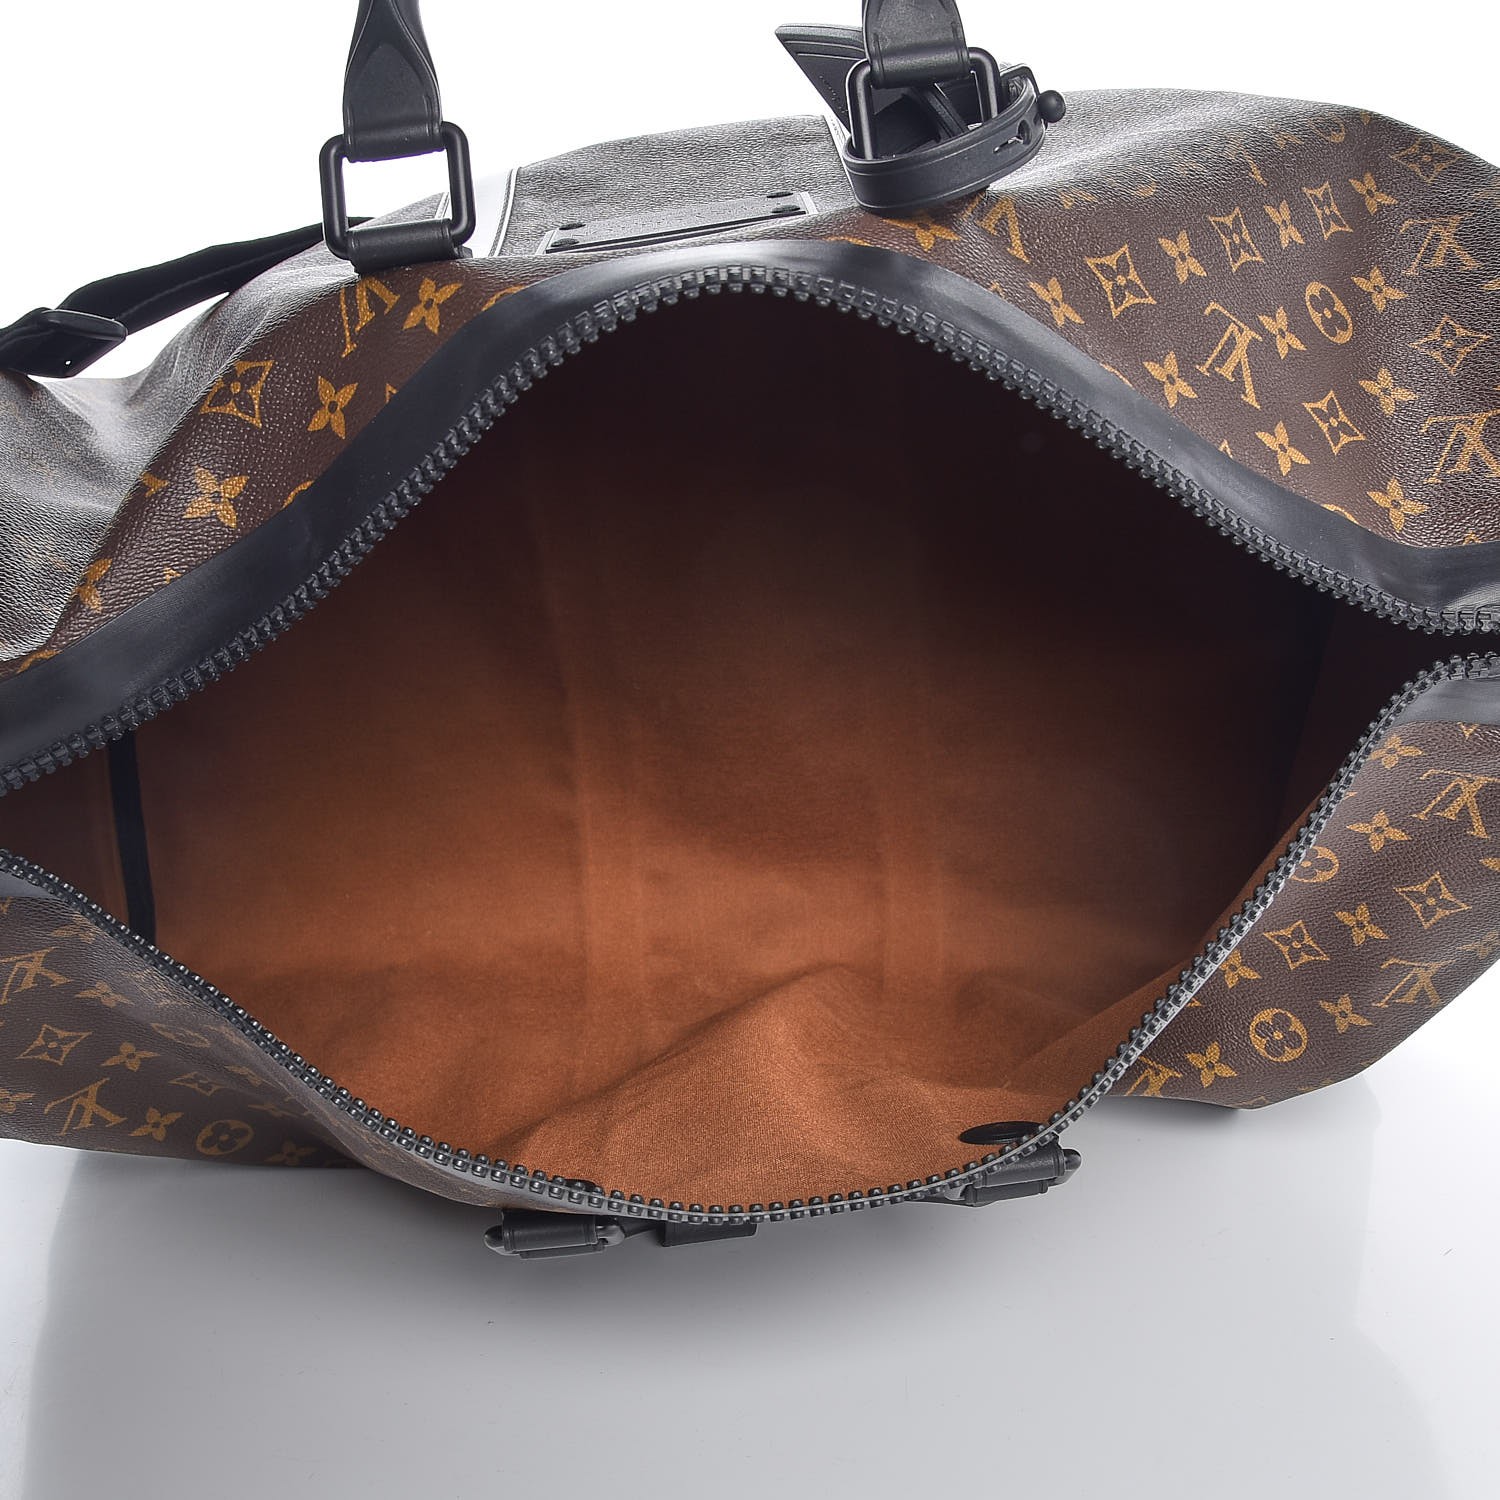 WATERPROOF Louis Vuitton Keepall 55 Review - Promoted by Sean Connery 